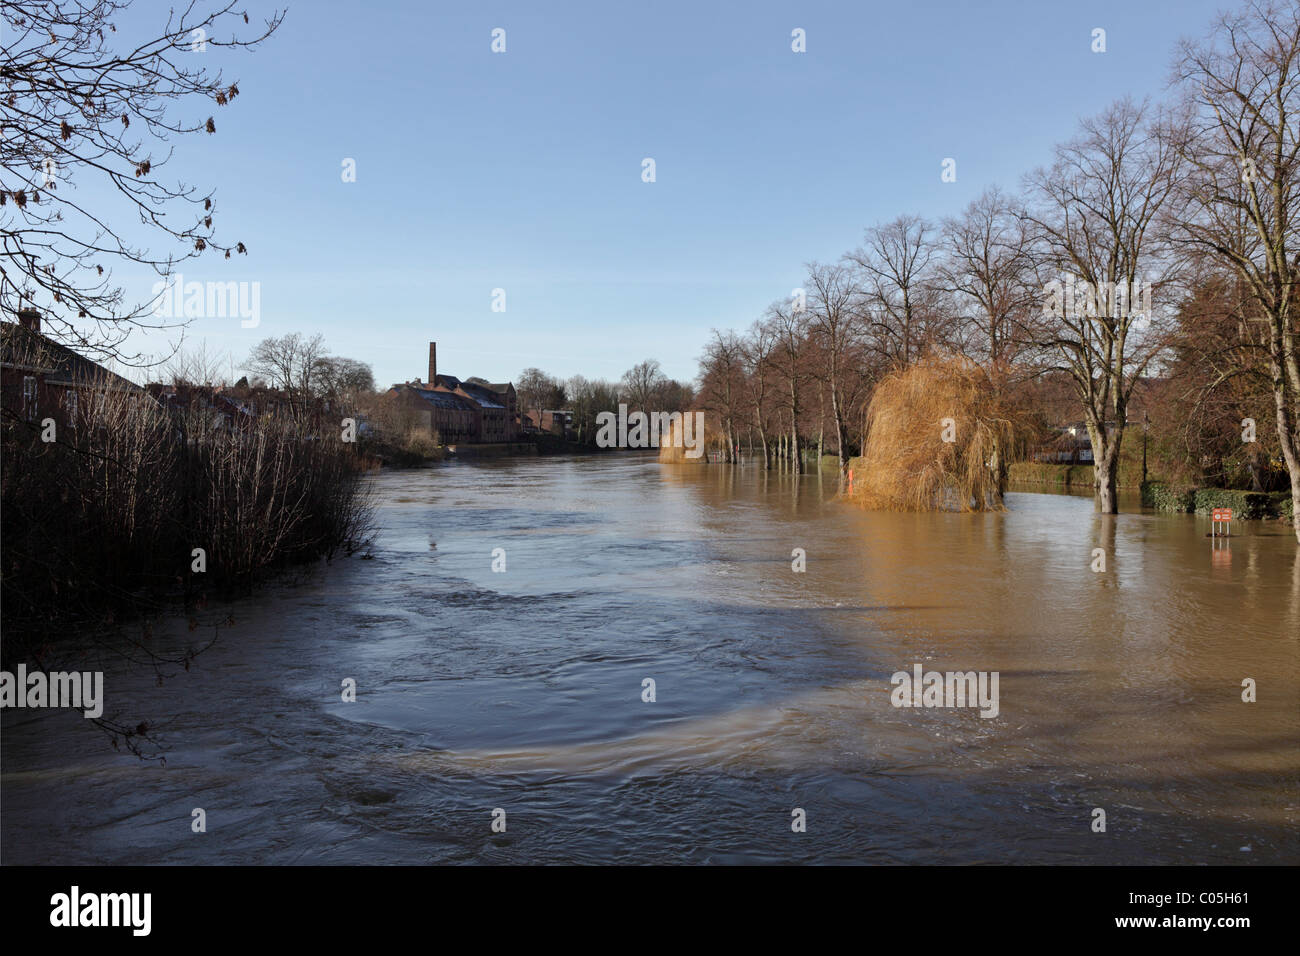 The River Severn in Shrewsbury during annual flooding during the winter months.Europe Stock Photo